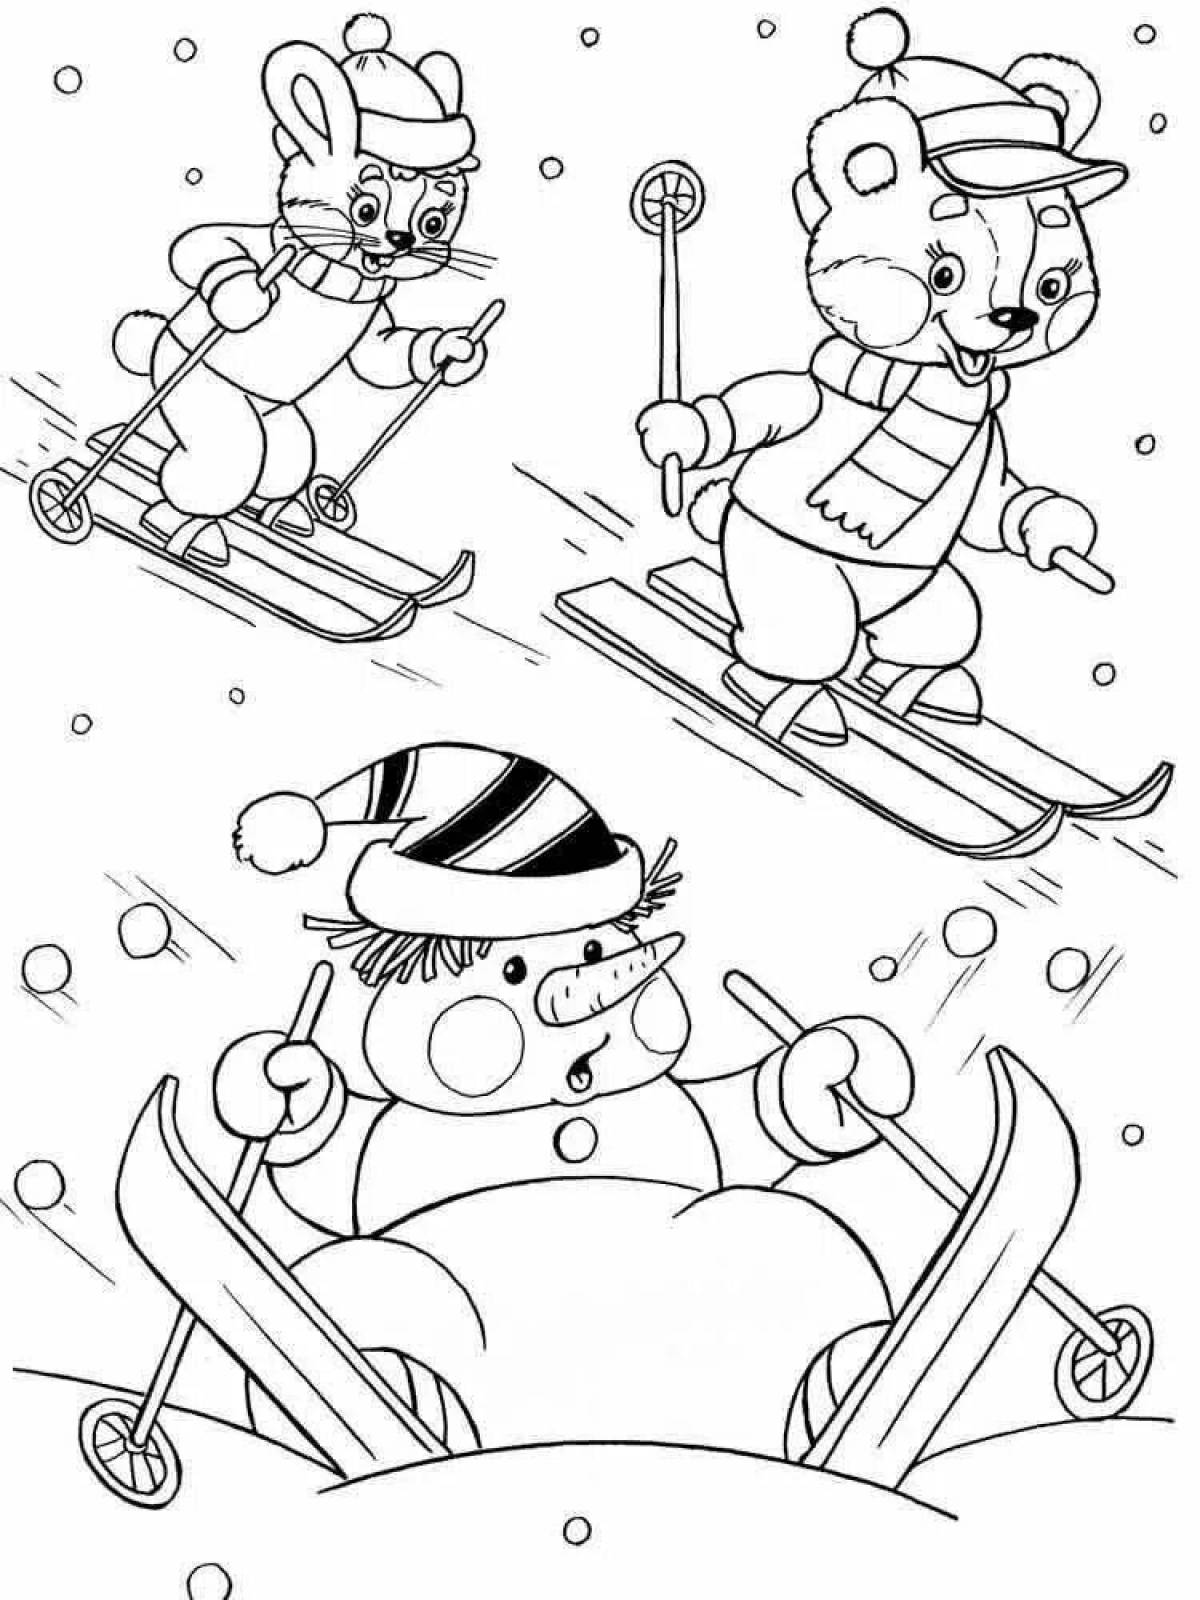 A fun winter coloring book for kids 2-3 years old